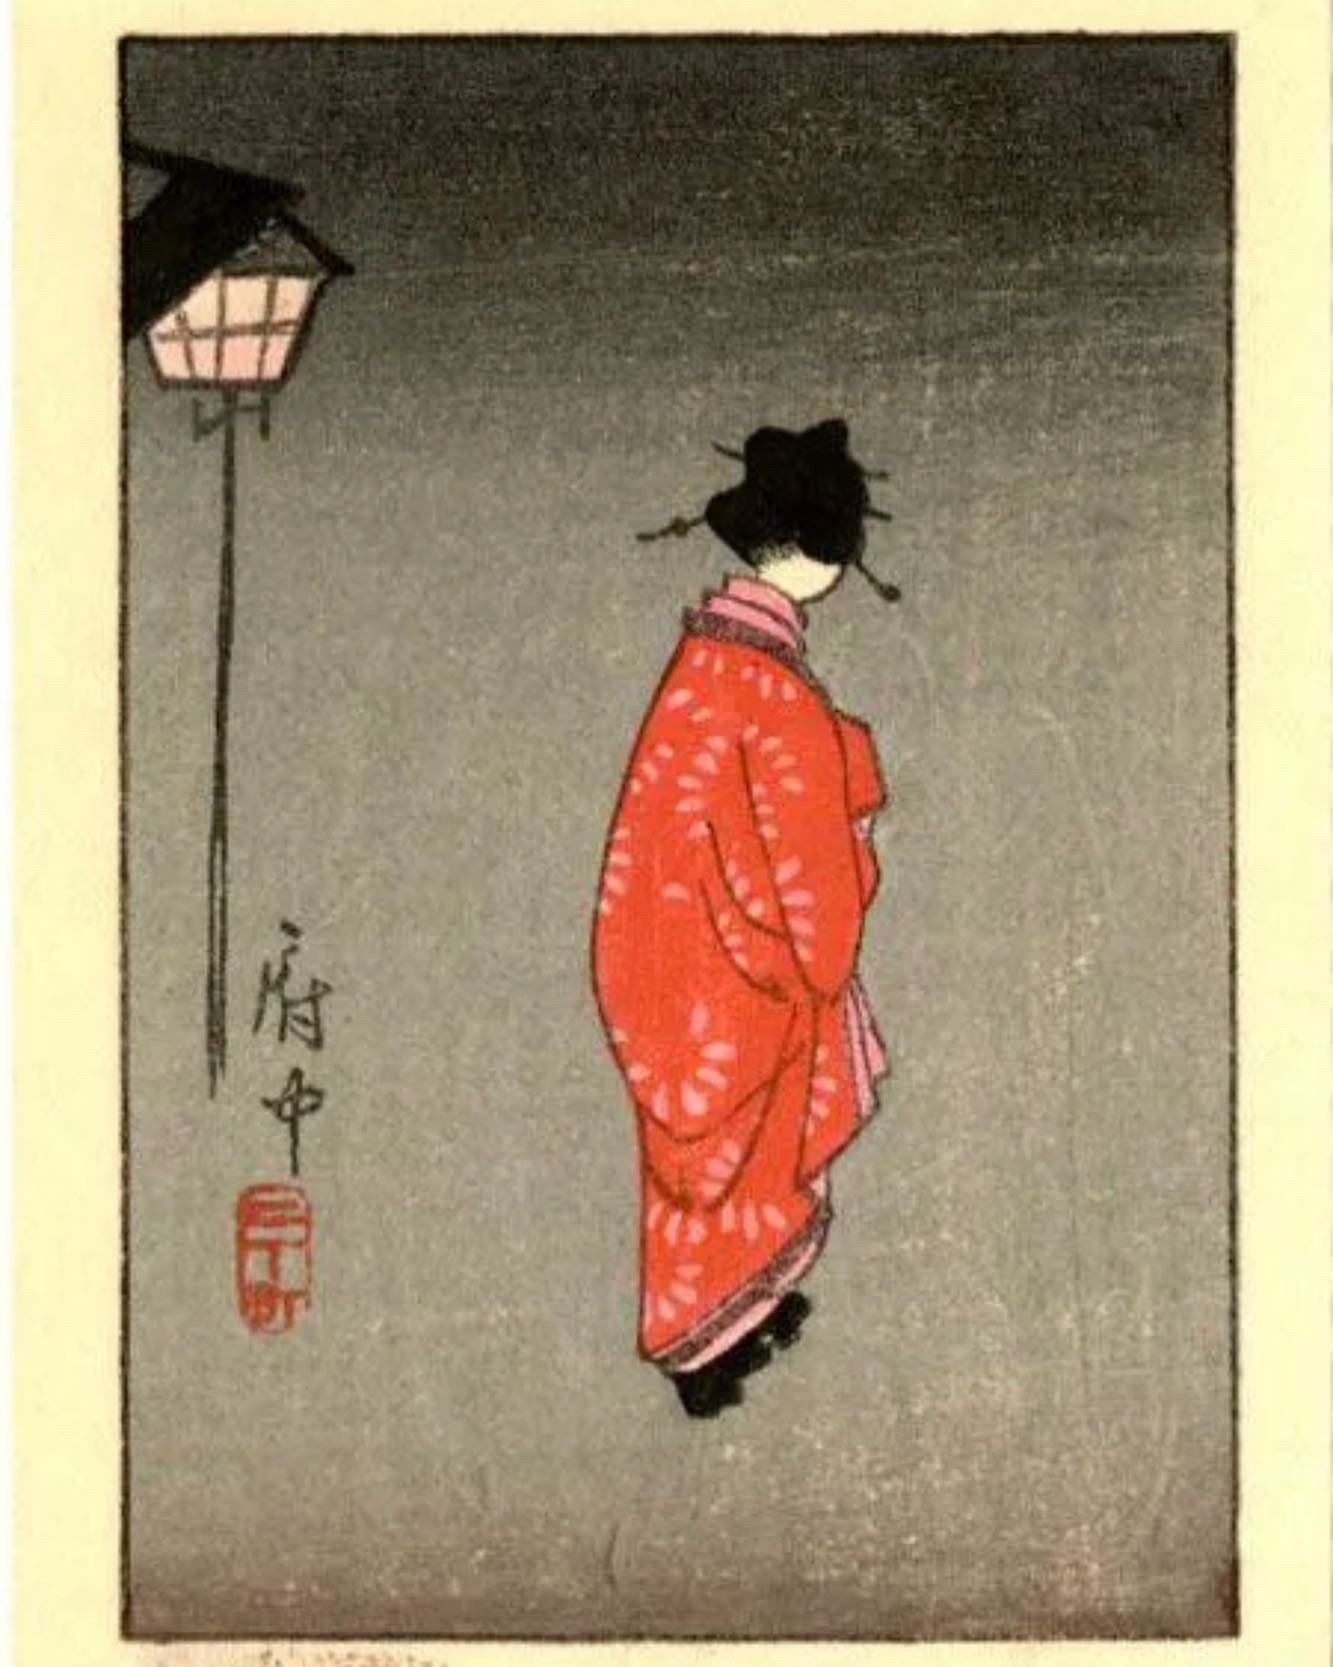 Japanese Woodblock Print, 1920s, published by Hasegawa